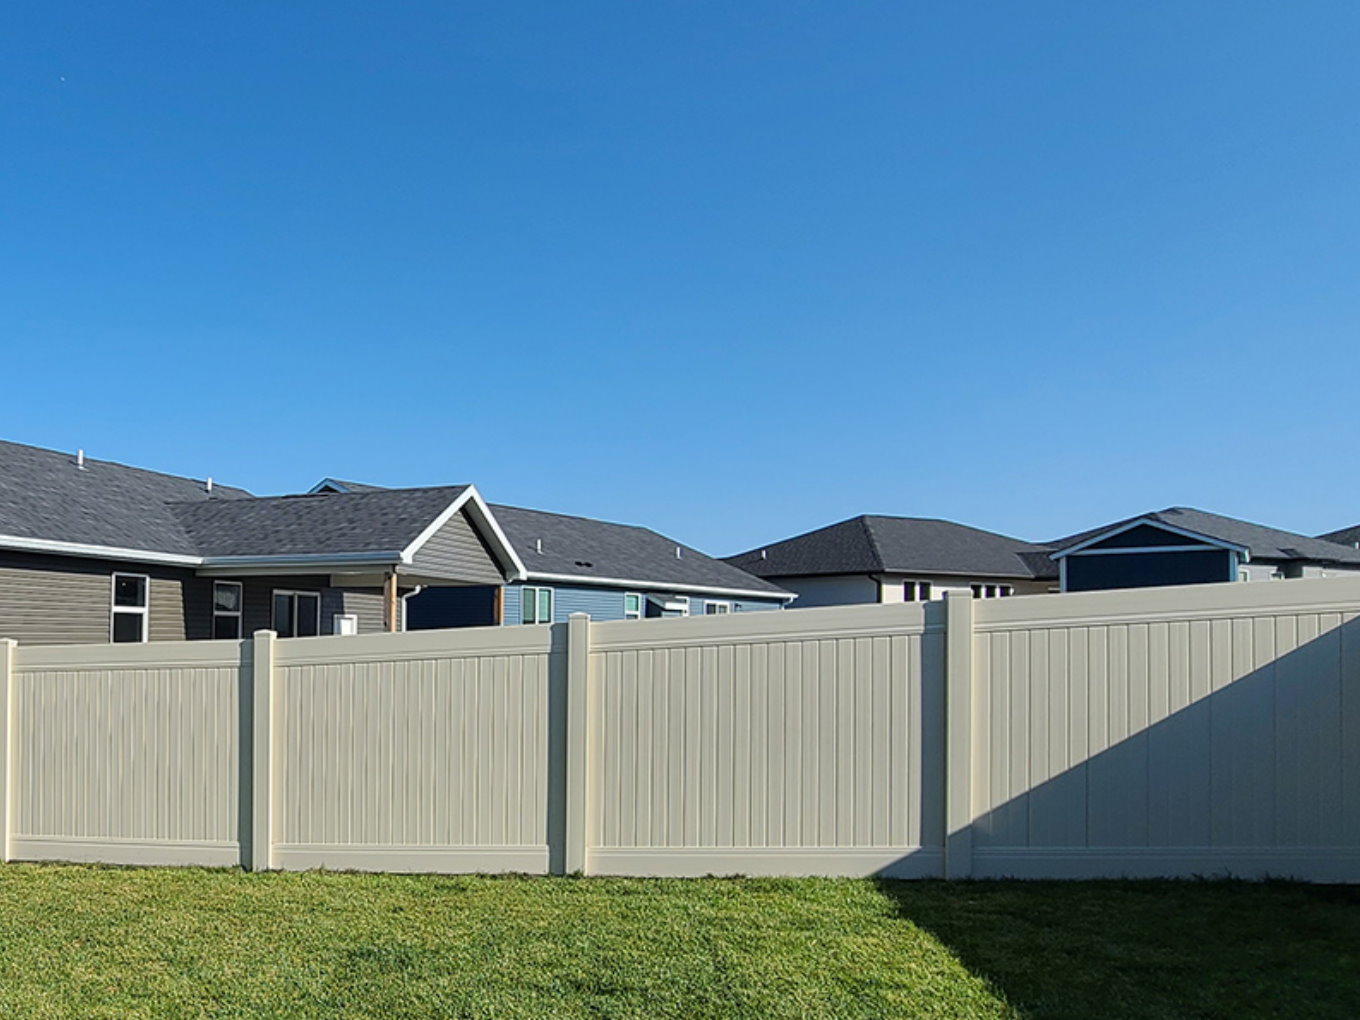 The Empire Fence Company Difference in Gretna Nebraska Fence Installations